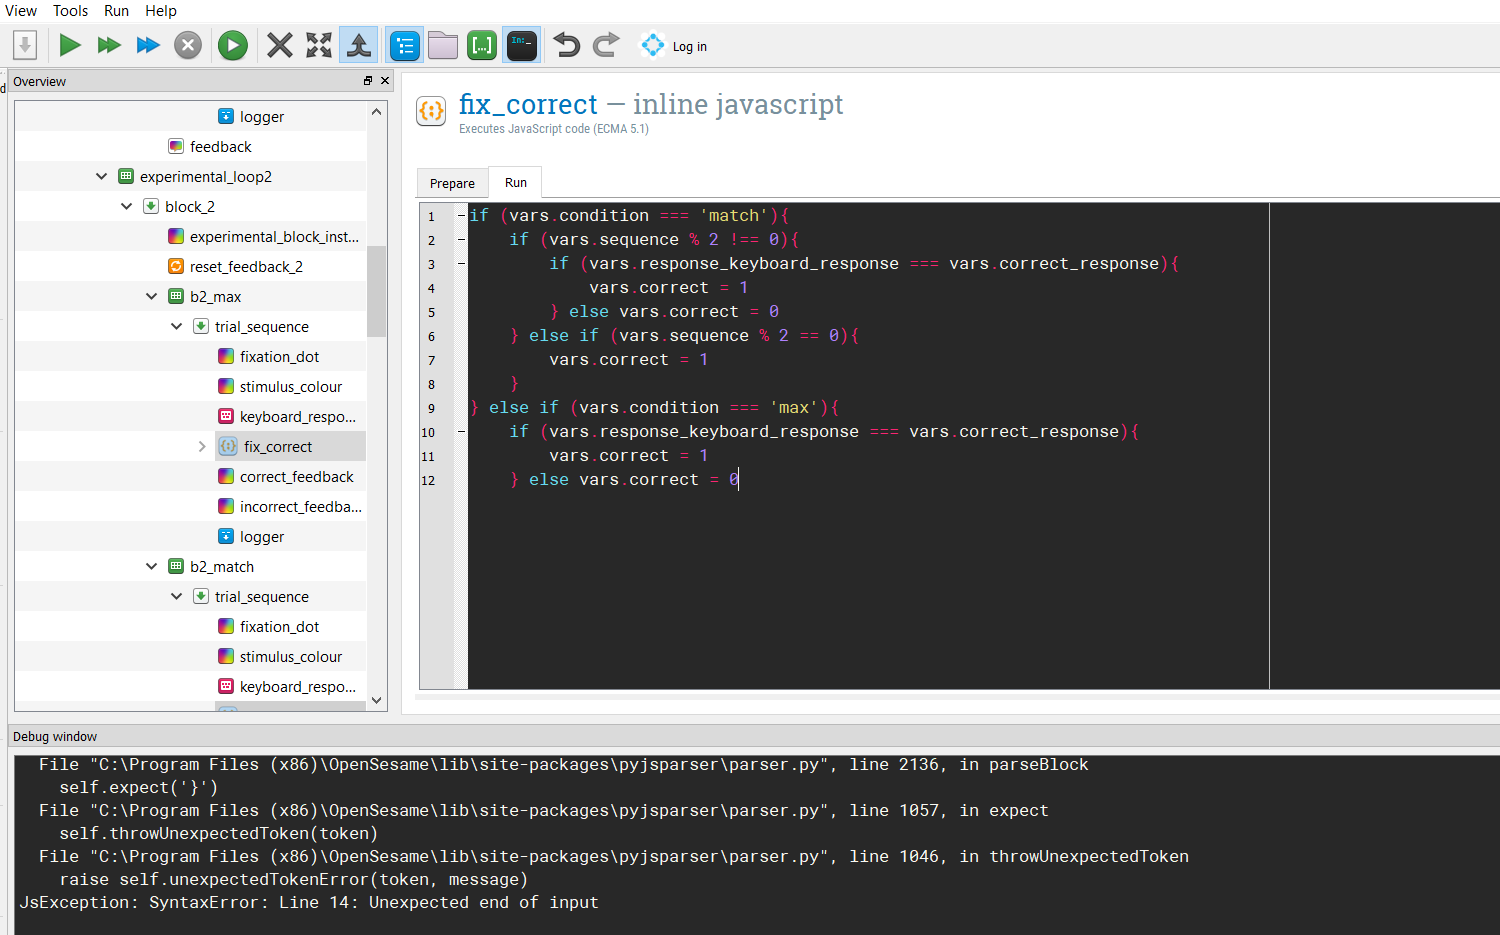 inline javascript for multiple and single responses classified as correct \u2014 Forum